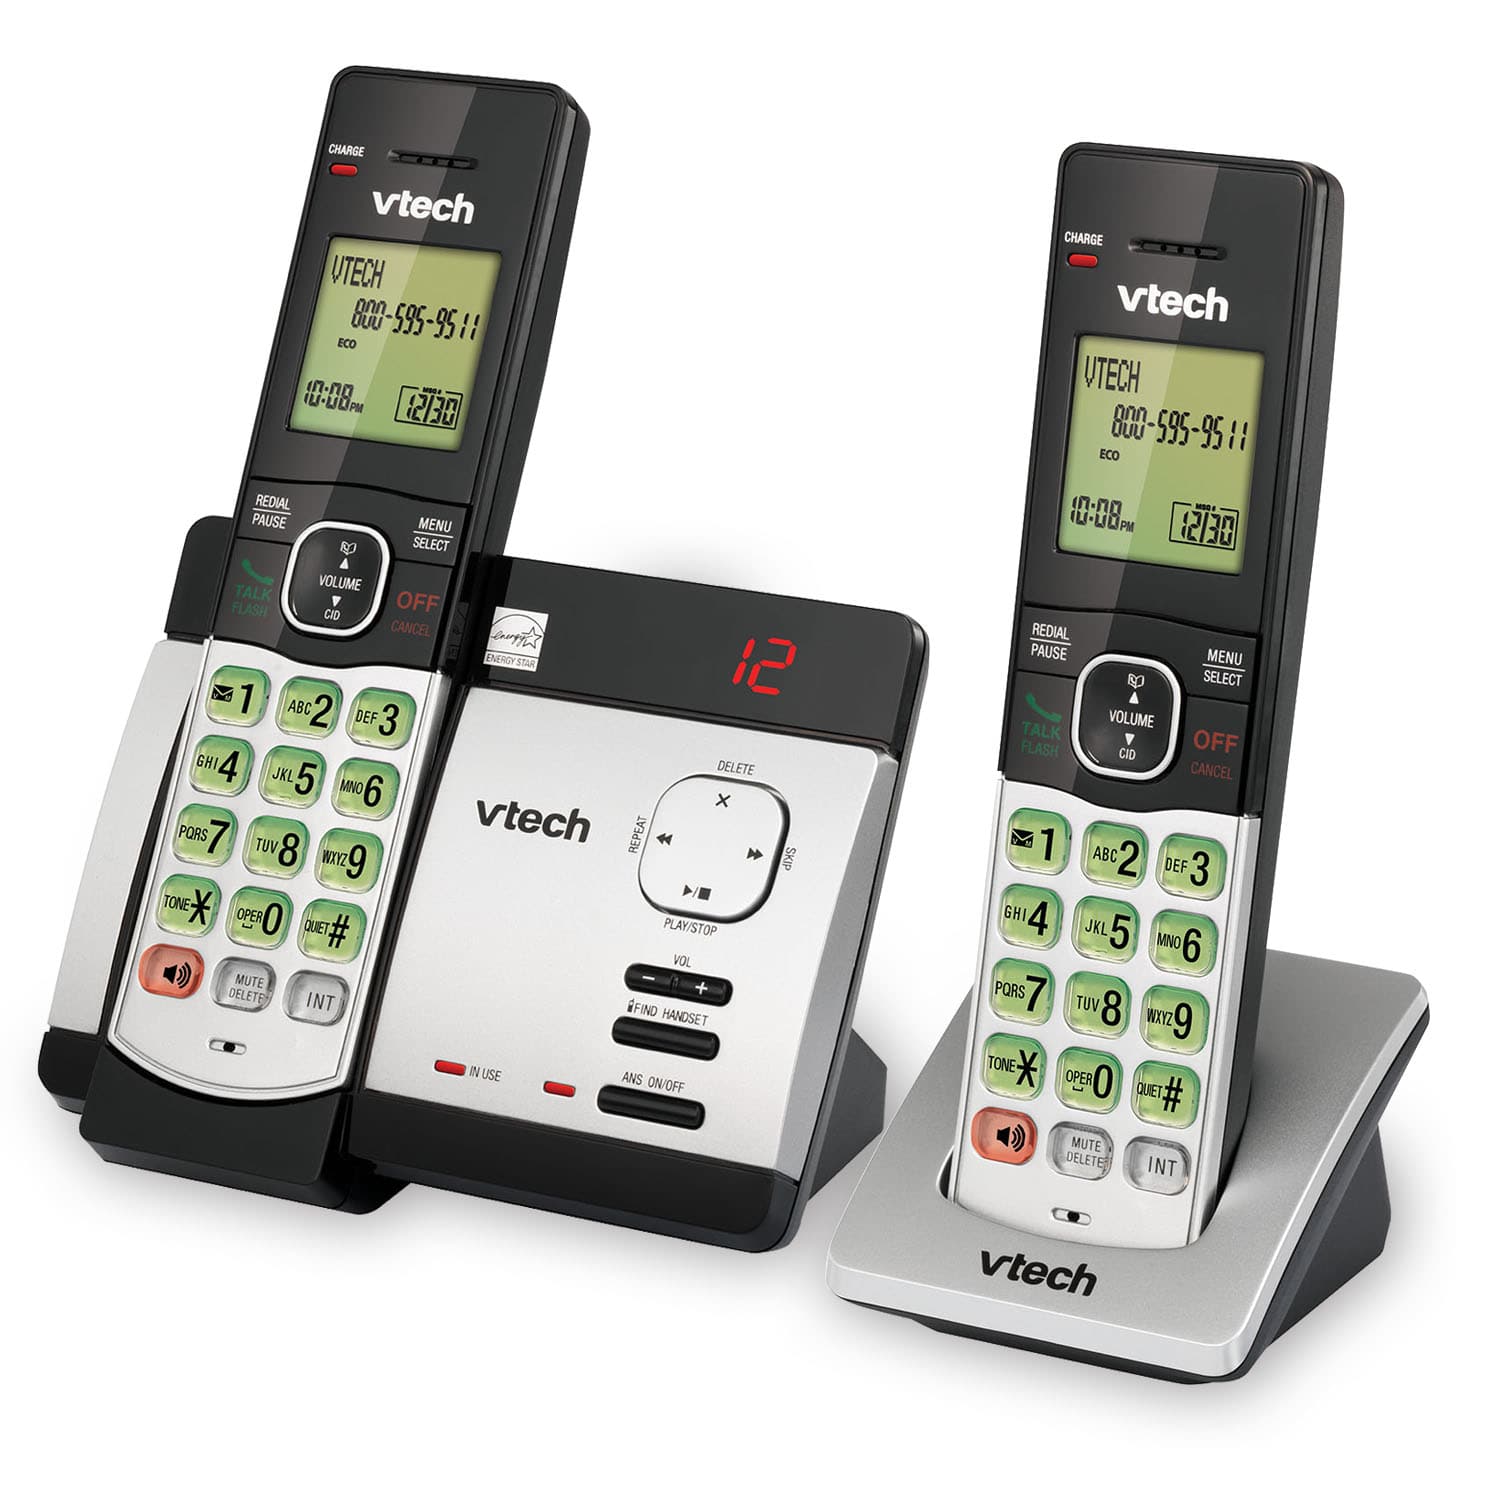 2 Handset Cordless Phone System with Caller ID/Call Waiting - view 2